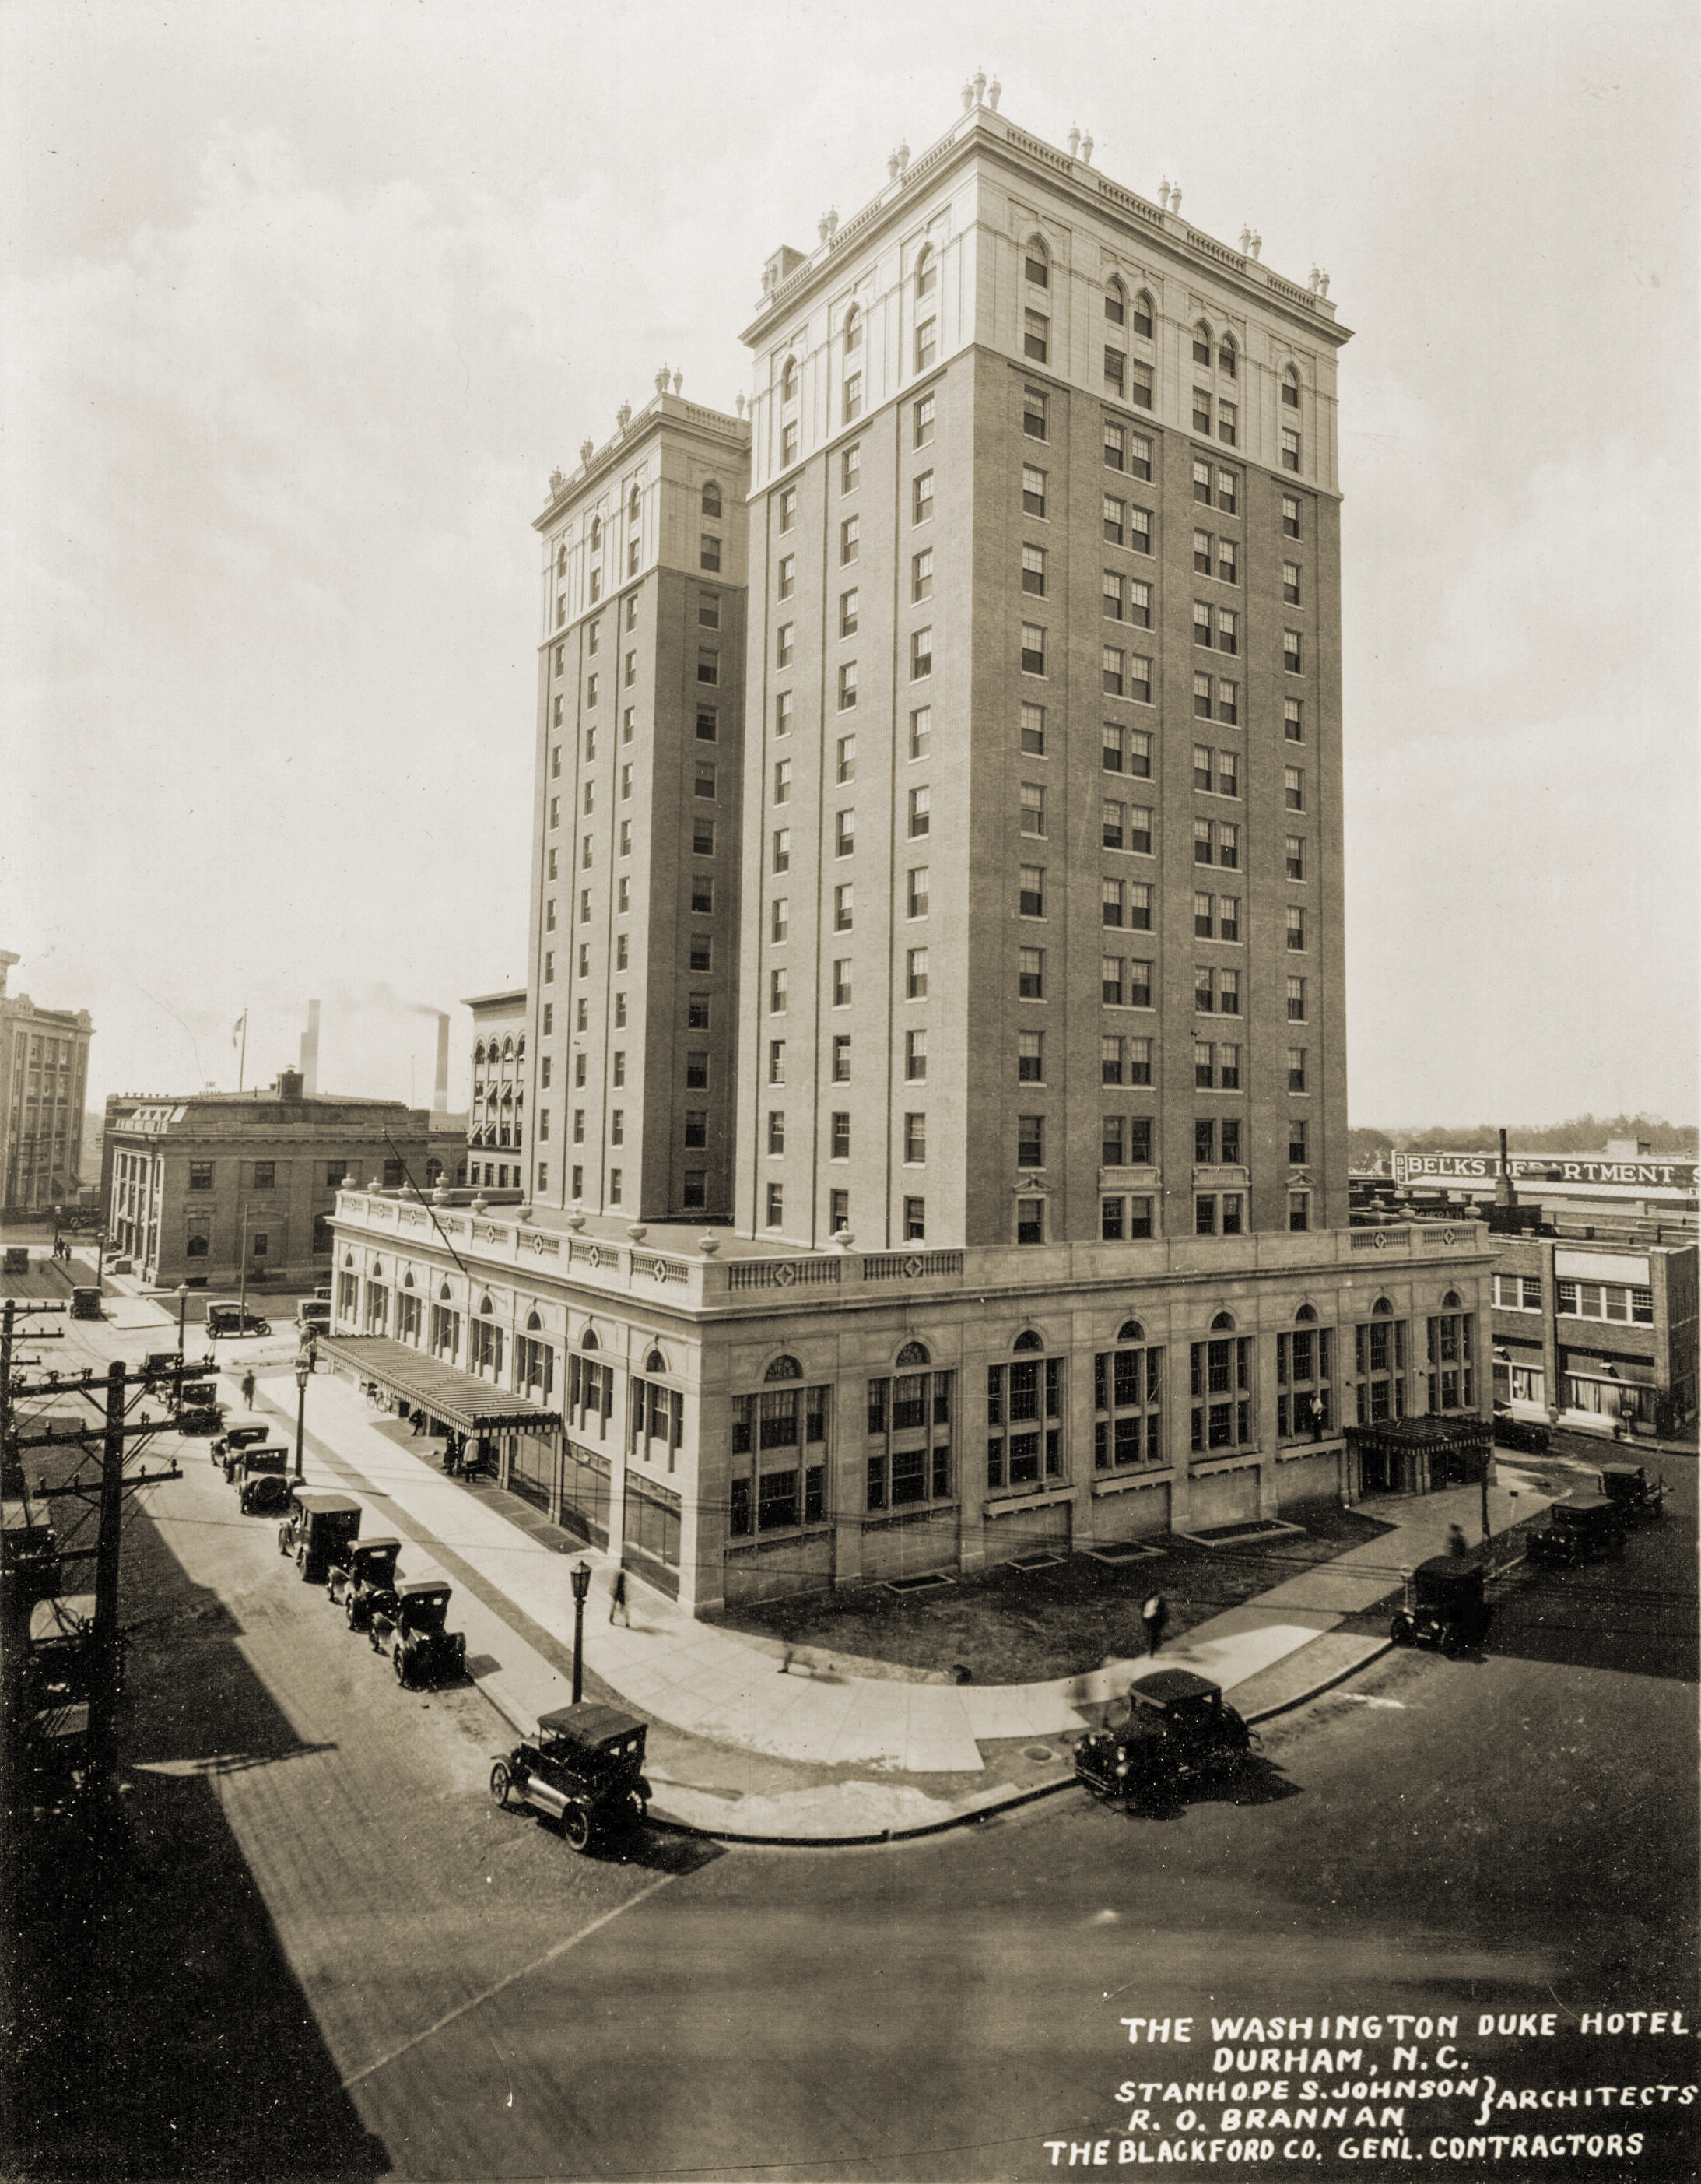 Washington Duke Hotel, Durham, North Carolina. From my collection of architectural photos.  View full size.